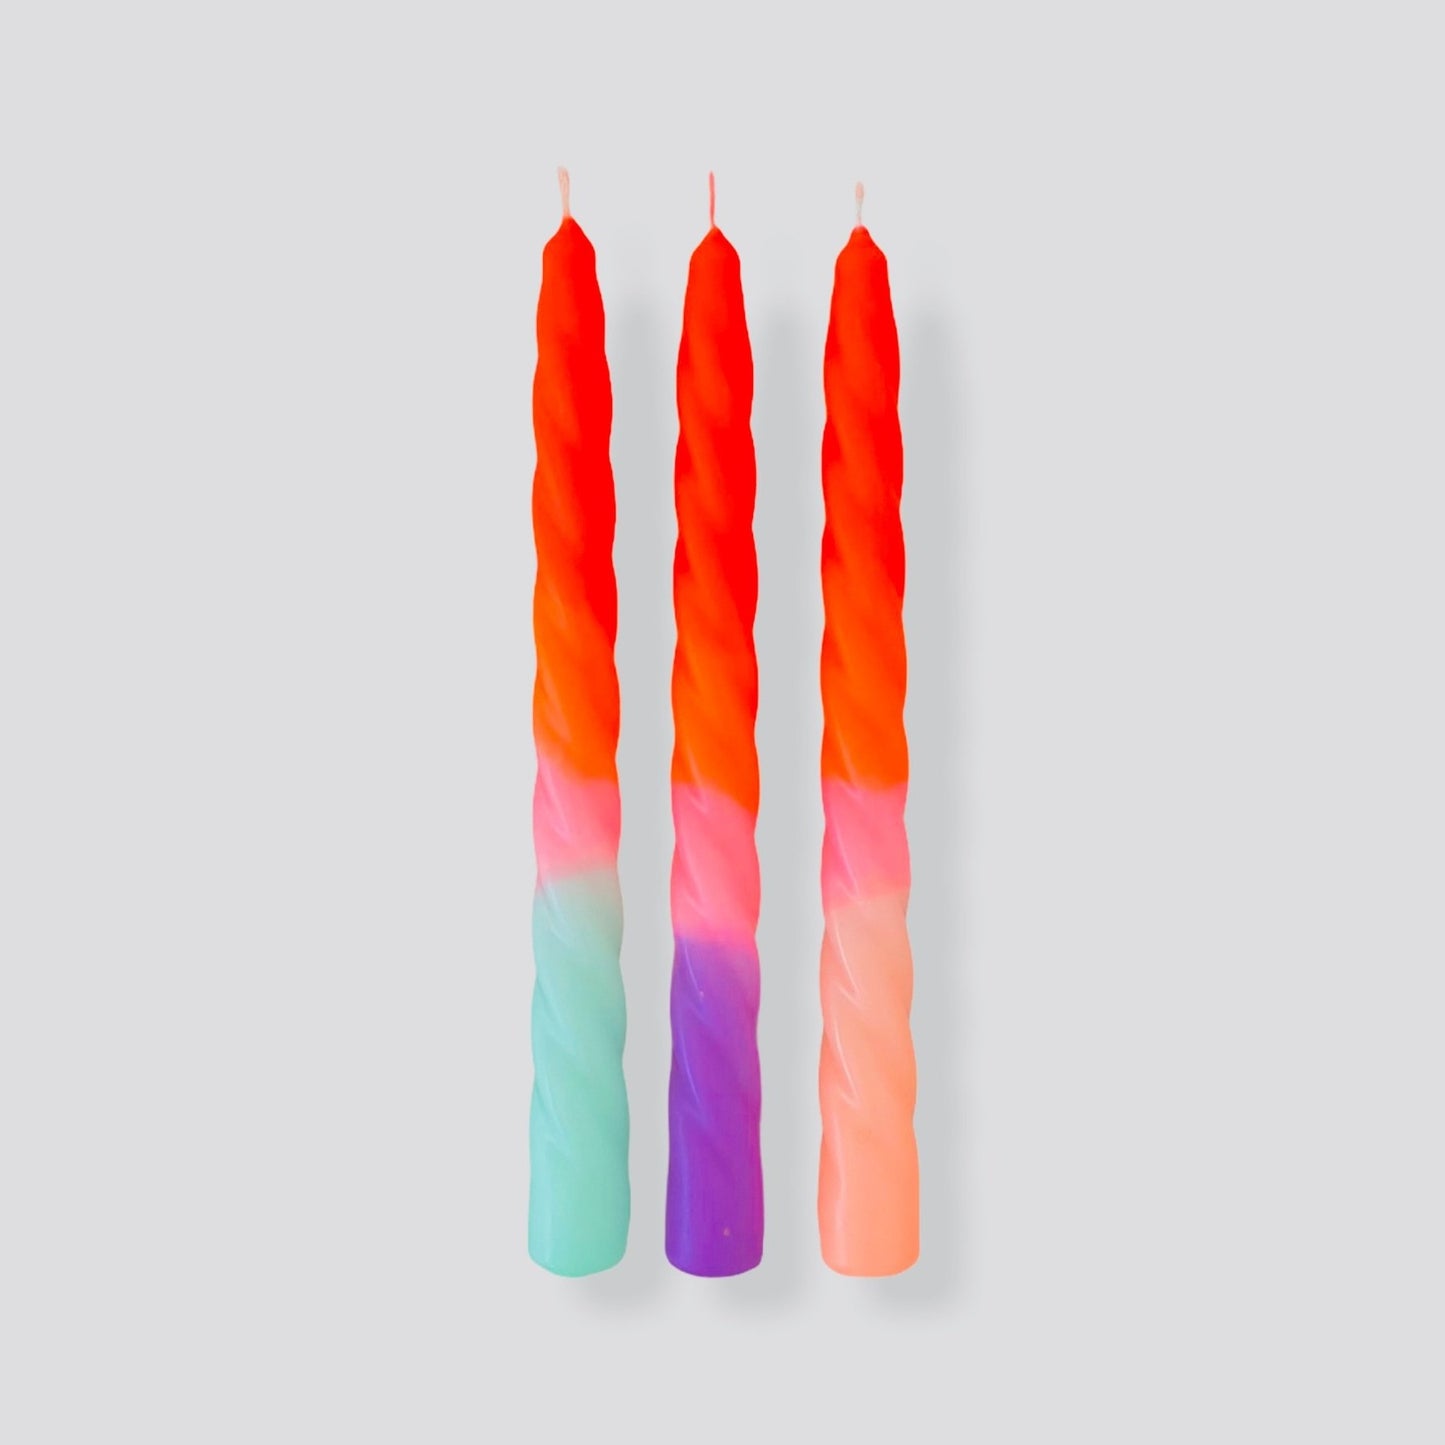 3 dipped dyed twisted candles blue purple pink orange